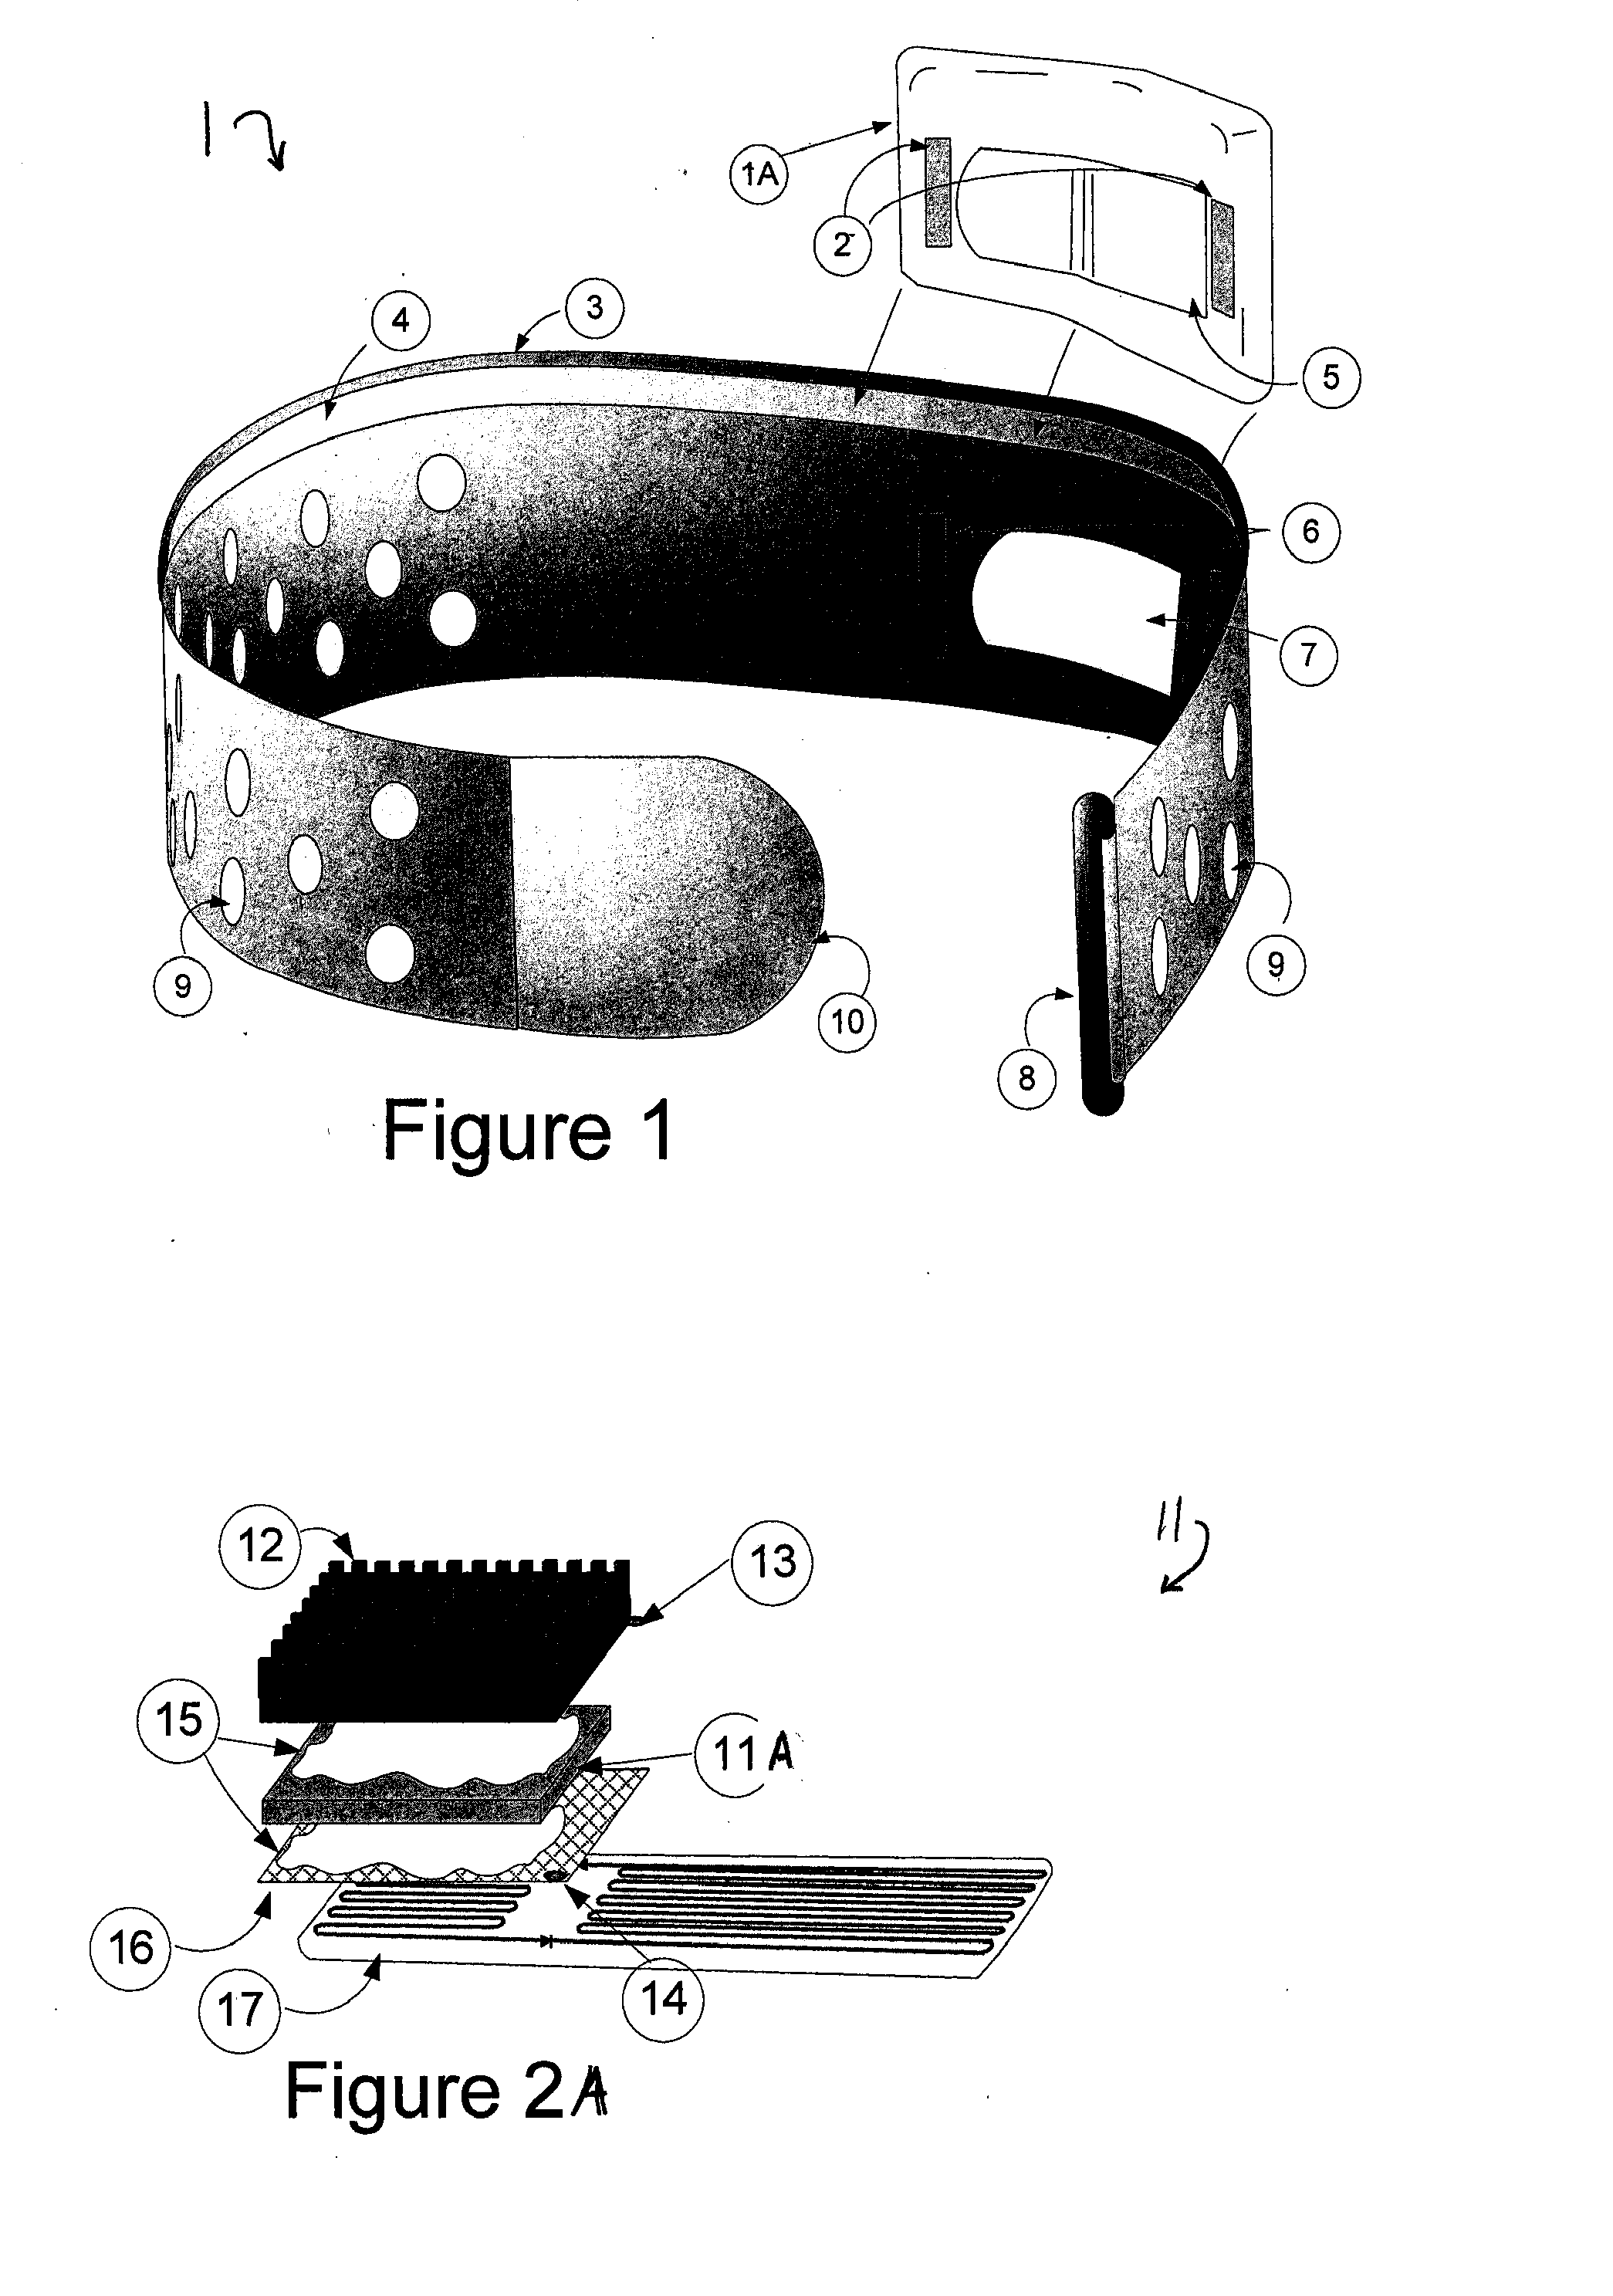 Apparatus for therapeutic cooling and warming of a body portion of a human or mammal